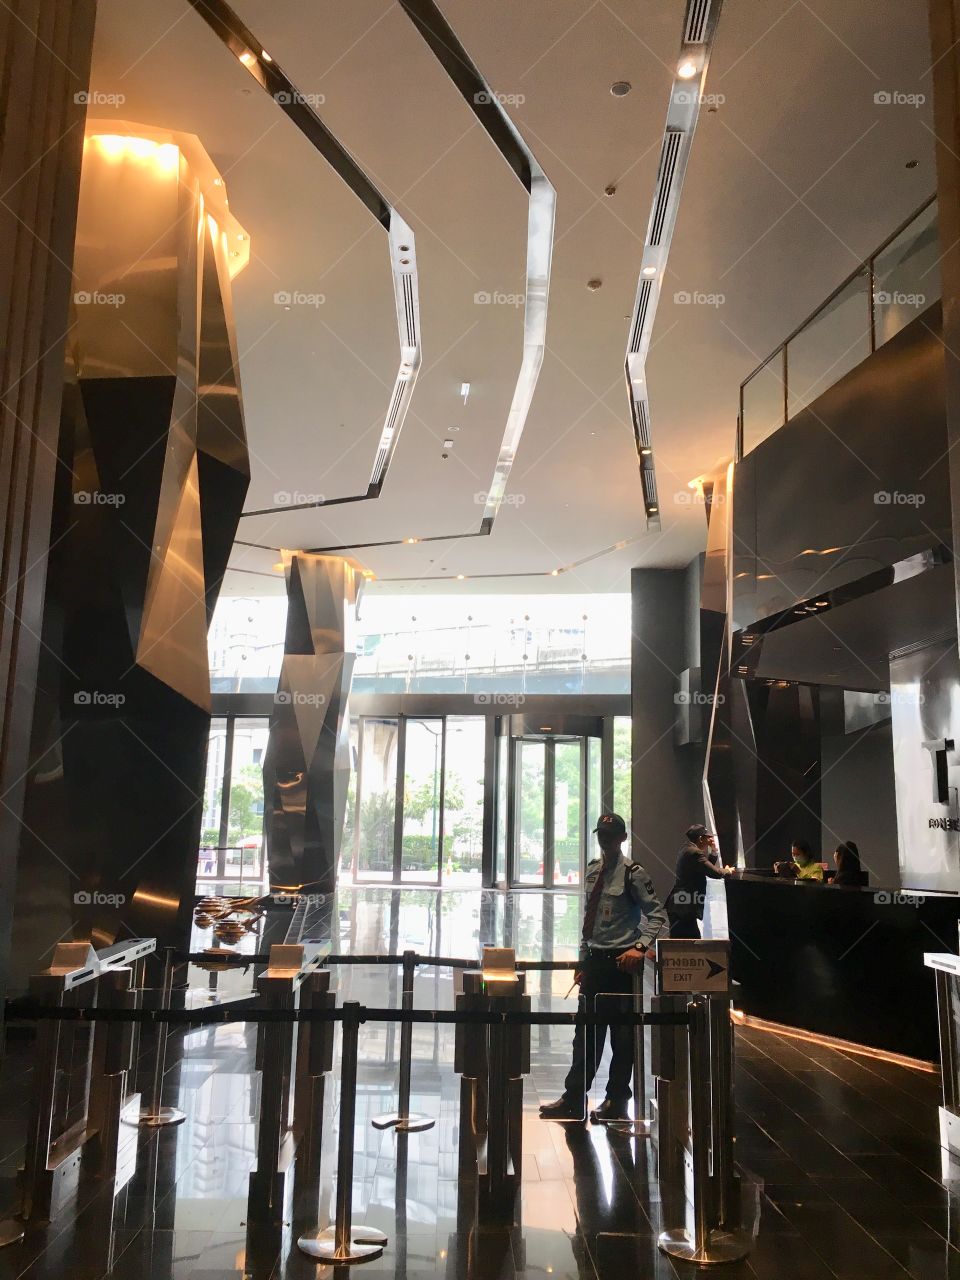 Stainless rose gold column in lobby